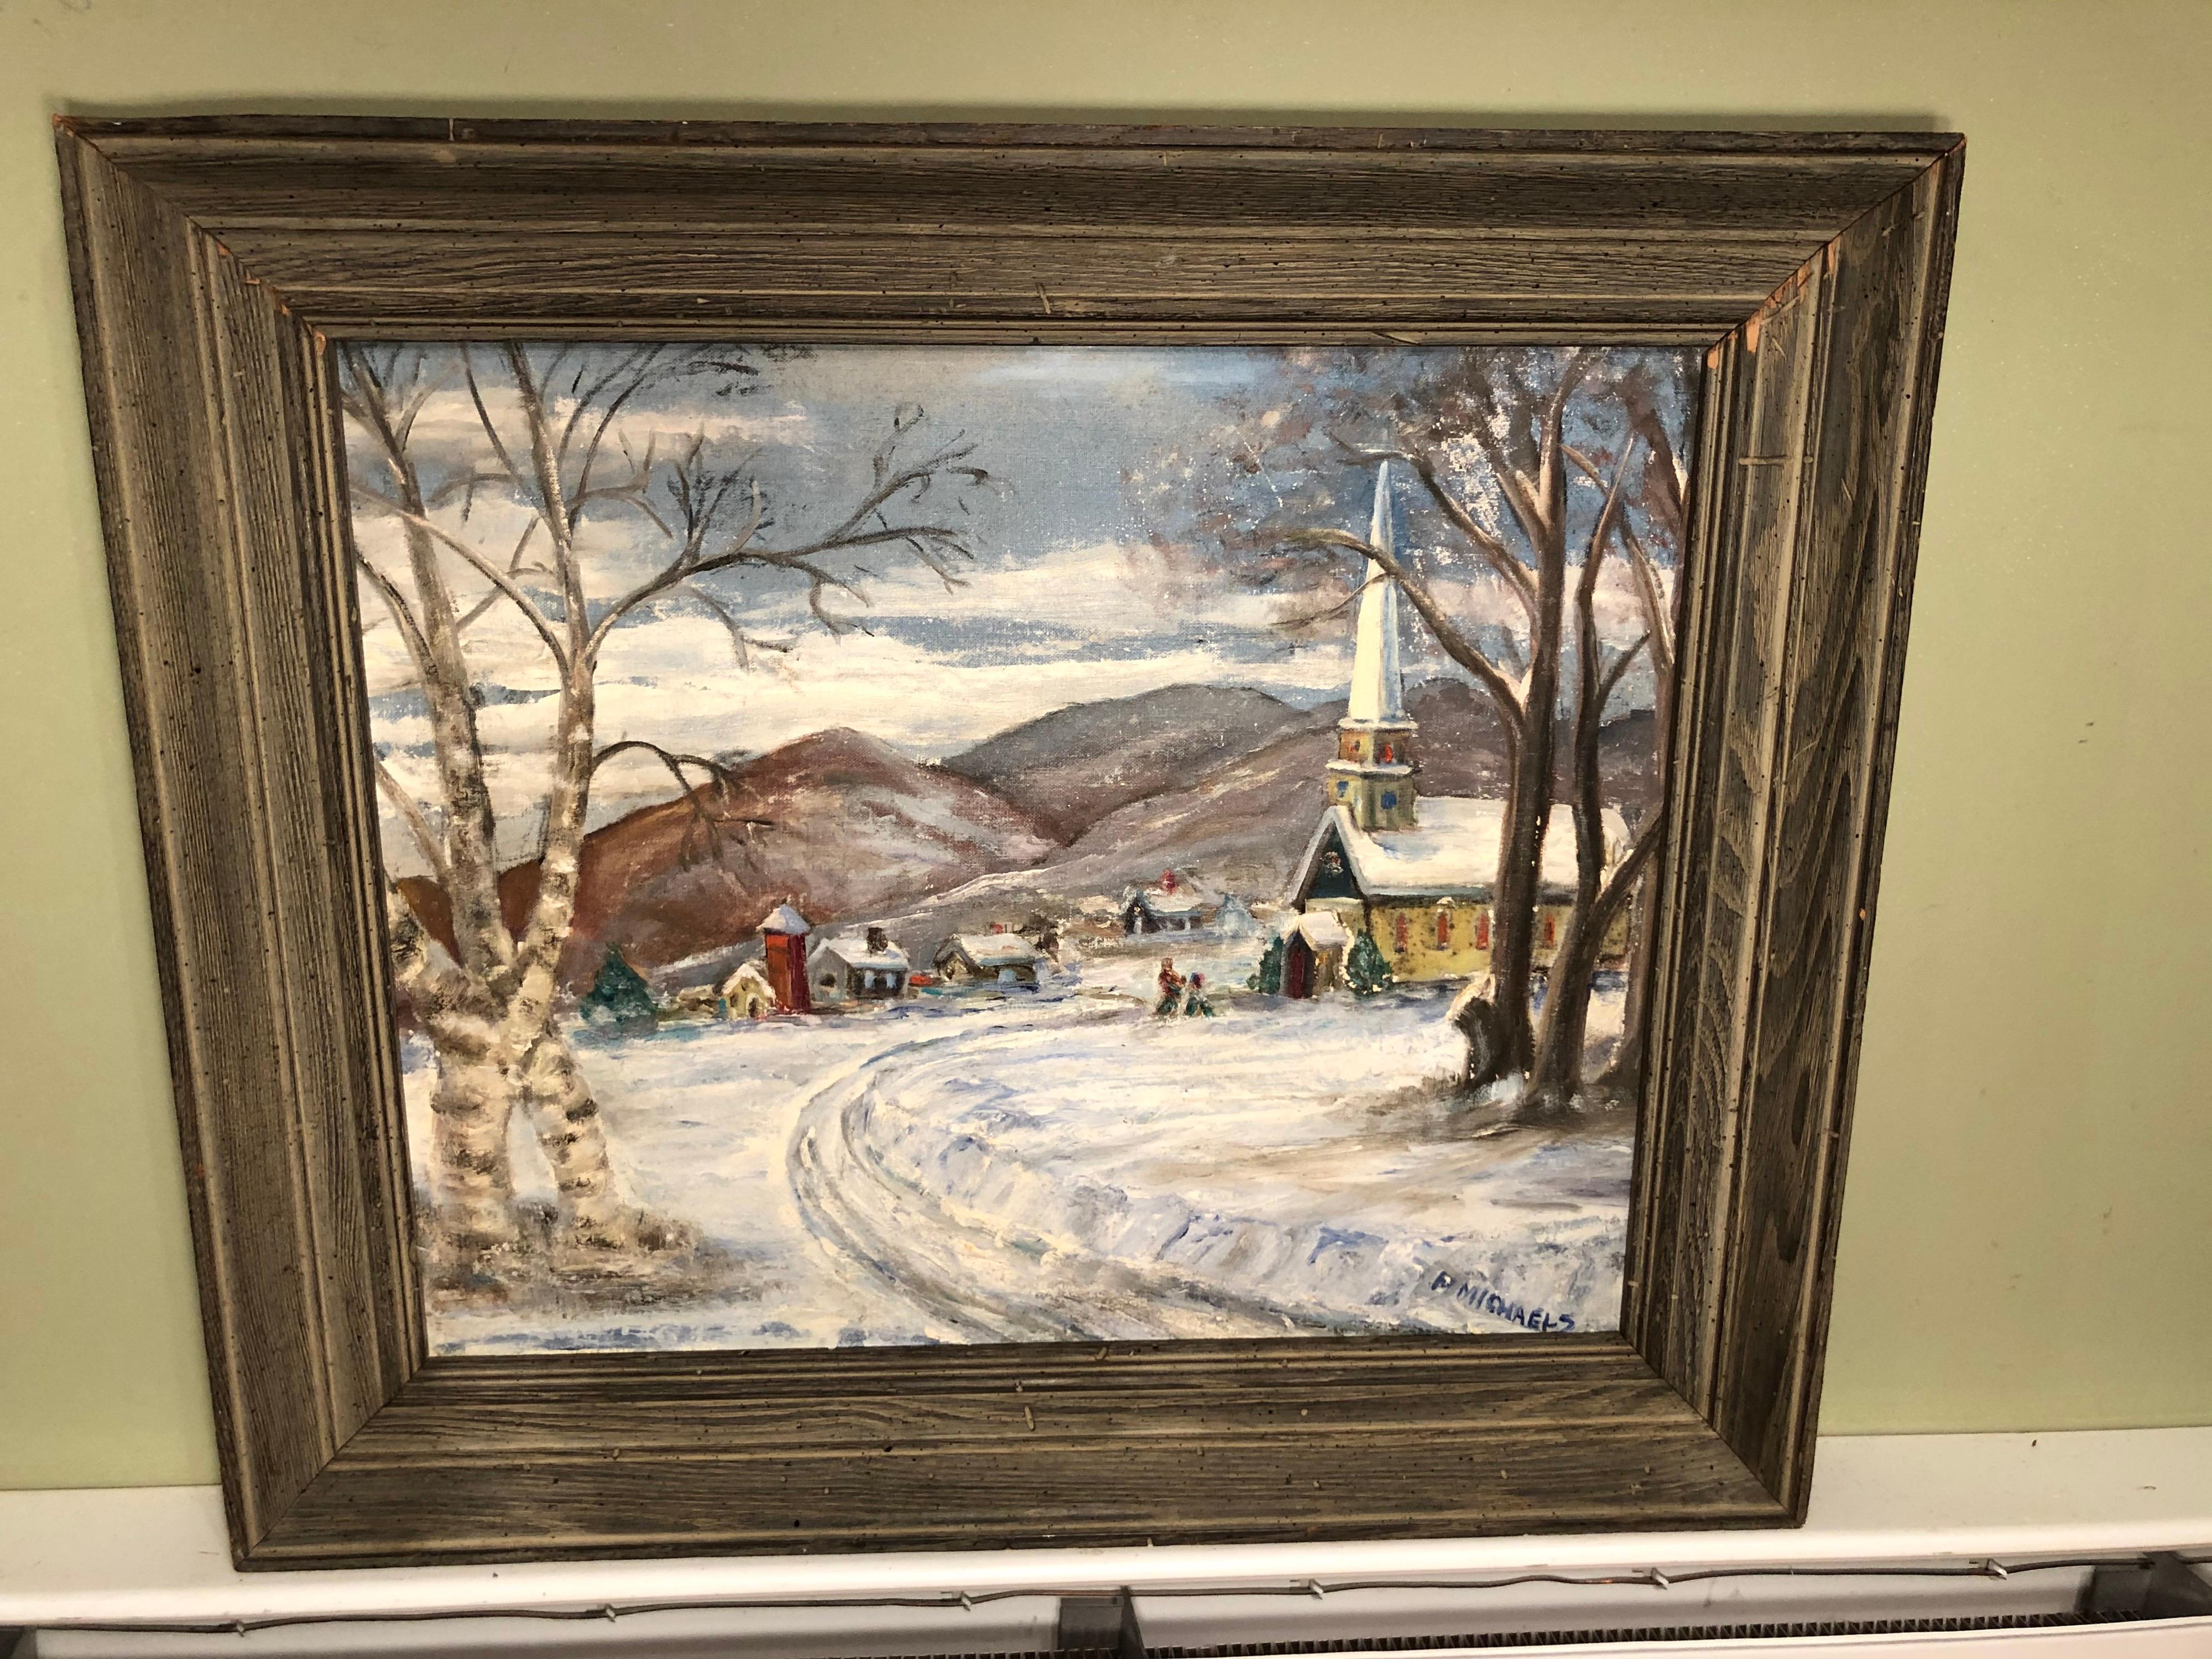 Signed Winter Church Scene by F. Michaels. Nice New England winter scene composition. Framed in a solid wooden frame. Signed lower right.